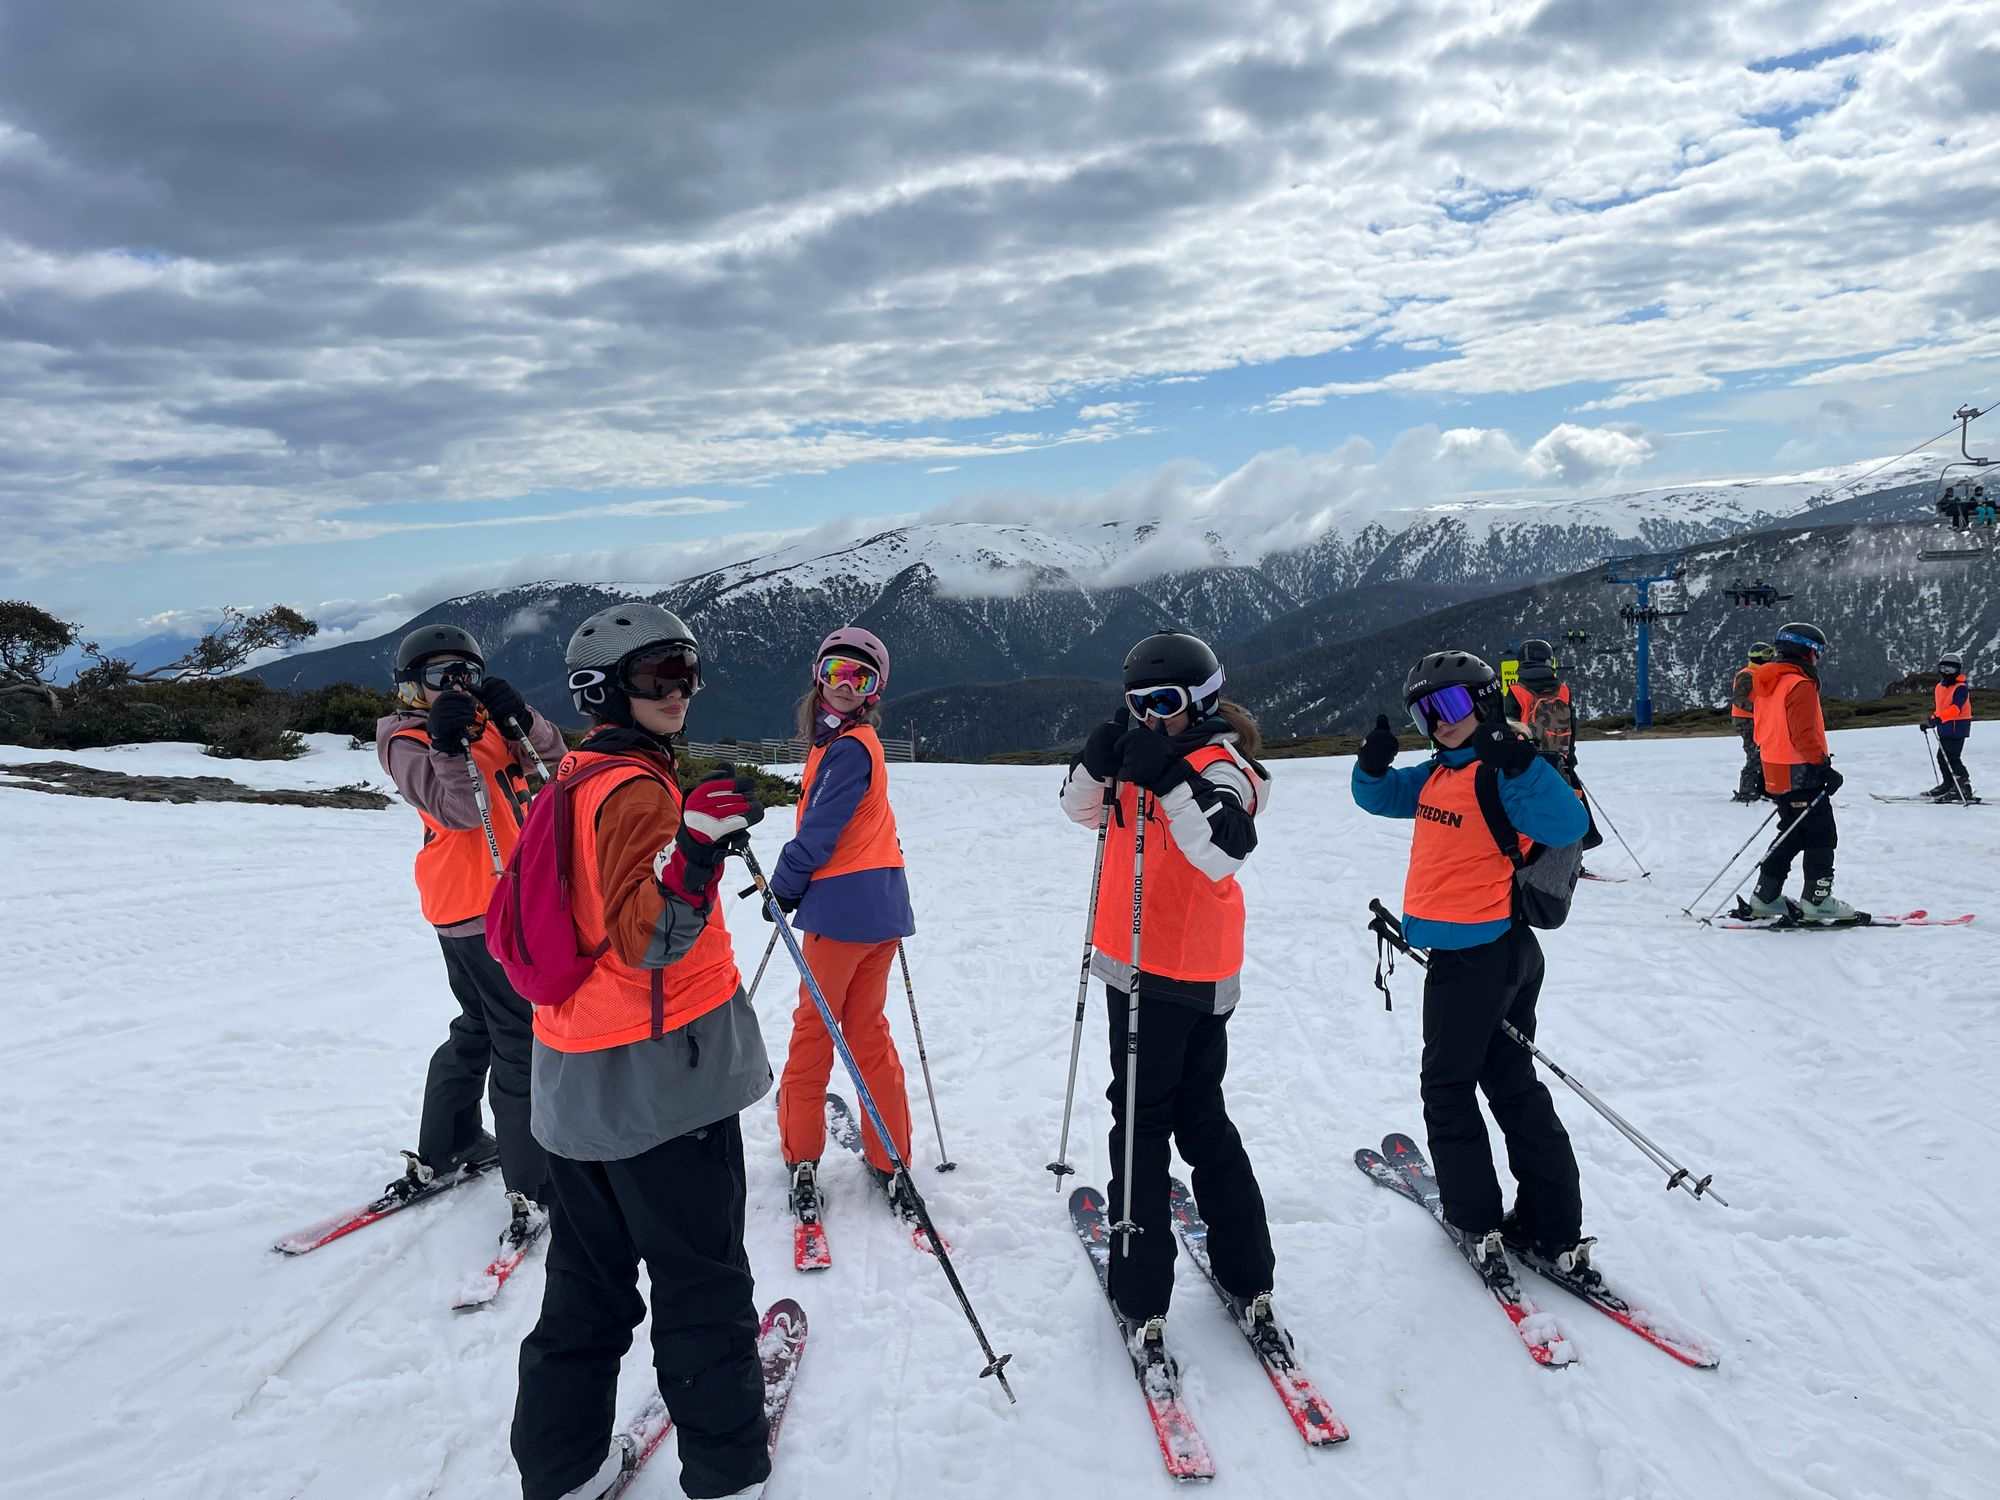 Years 7-10 students are gathered at Falls Creek, they are on skis and are wearing snow clothes. They are looking back at the camera and smiling.